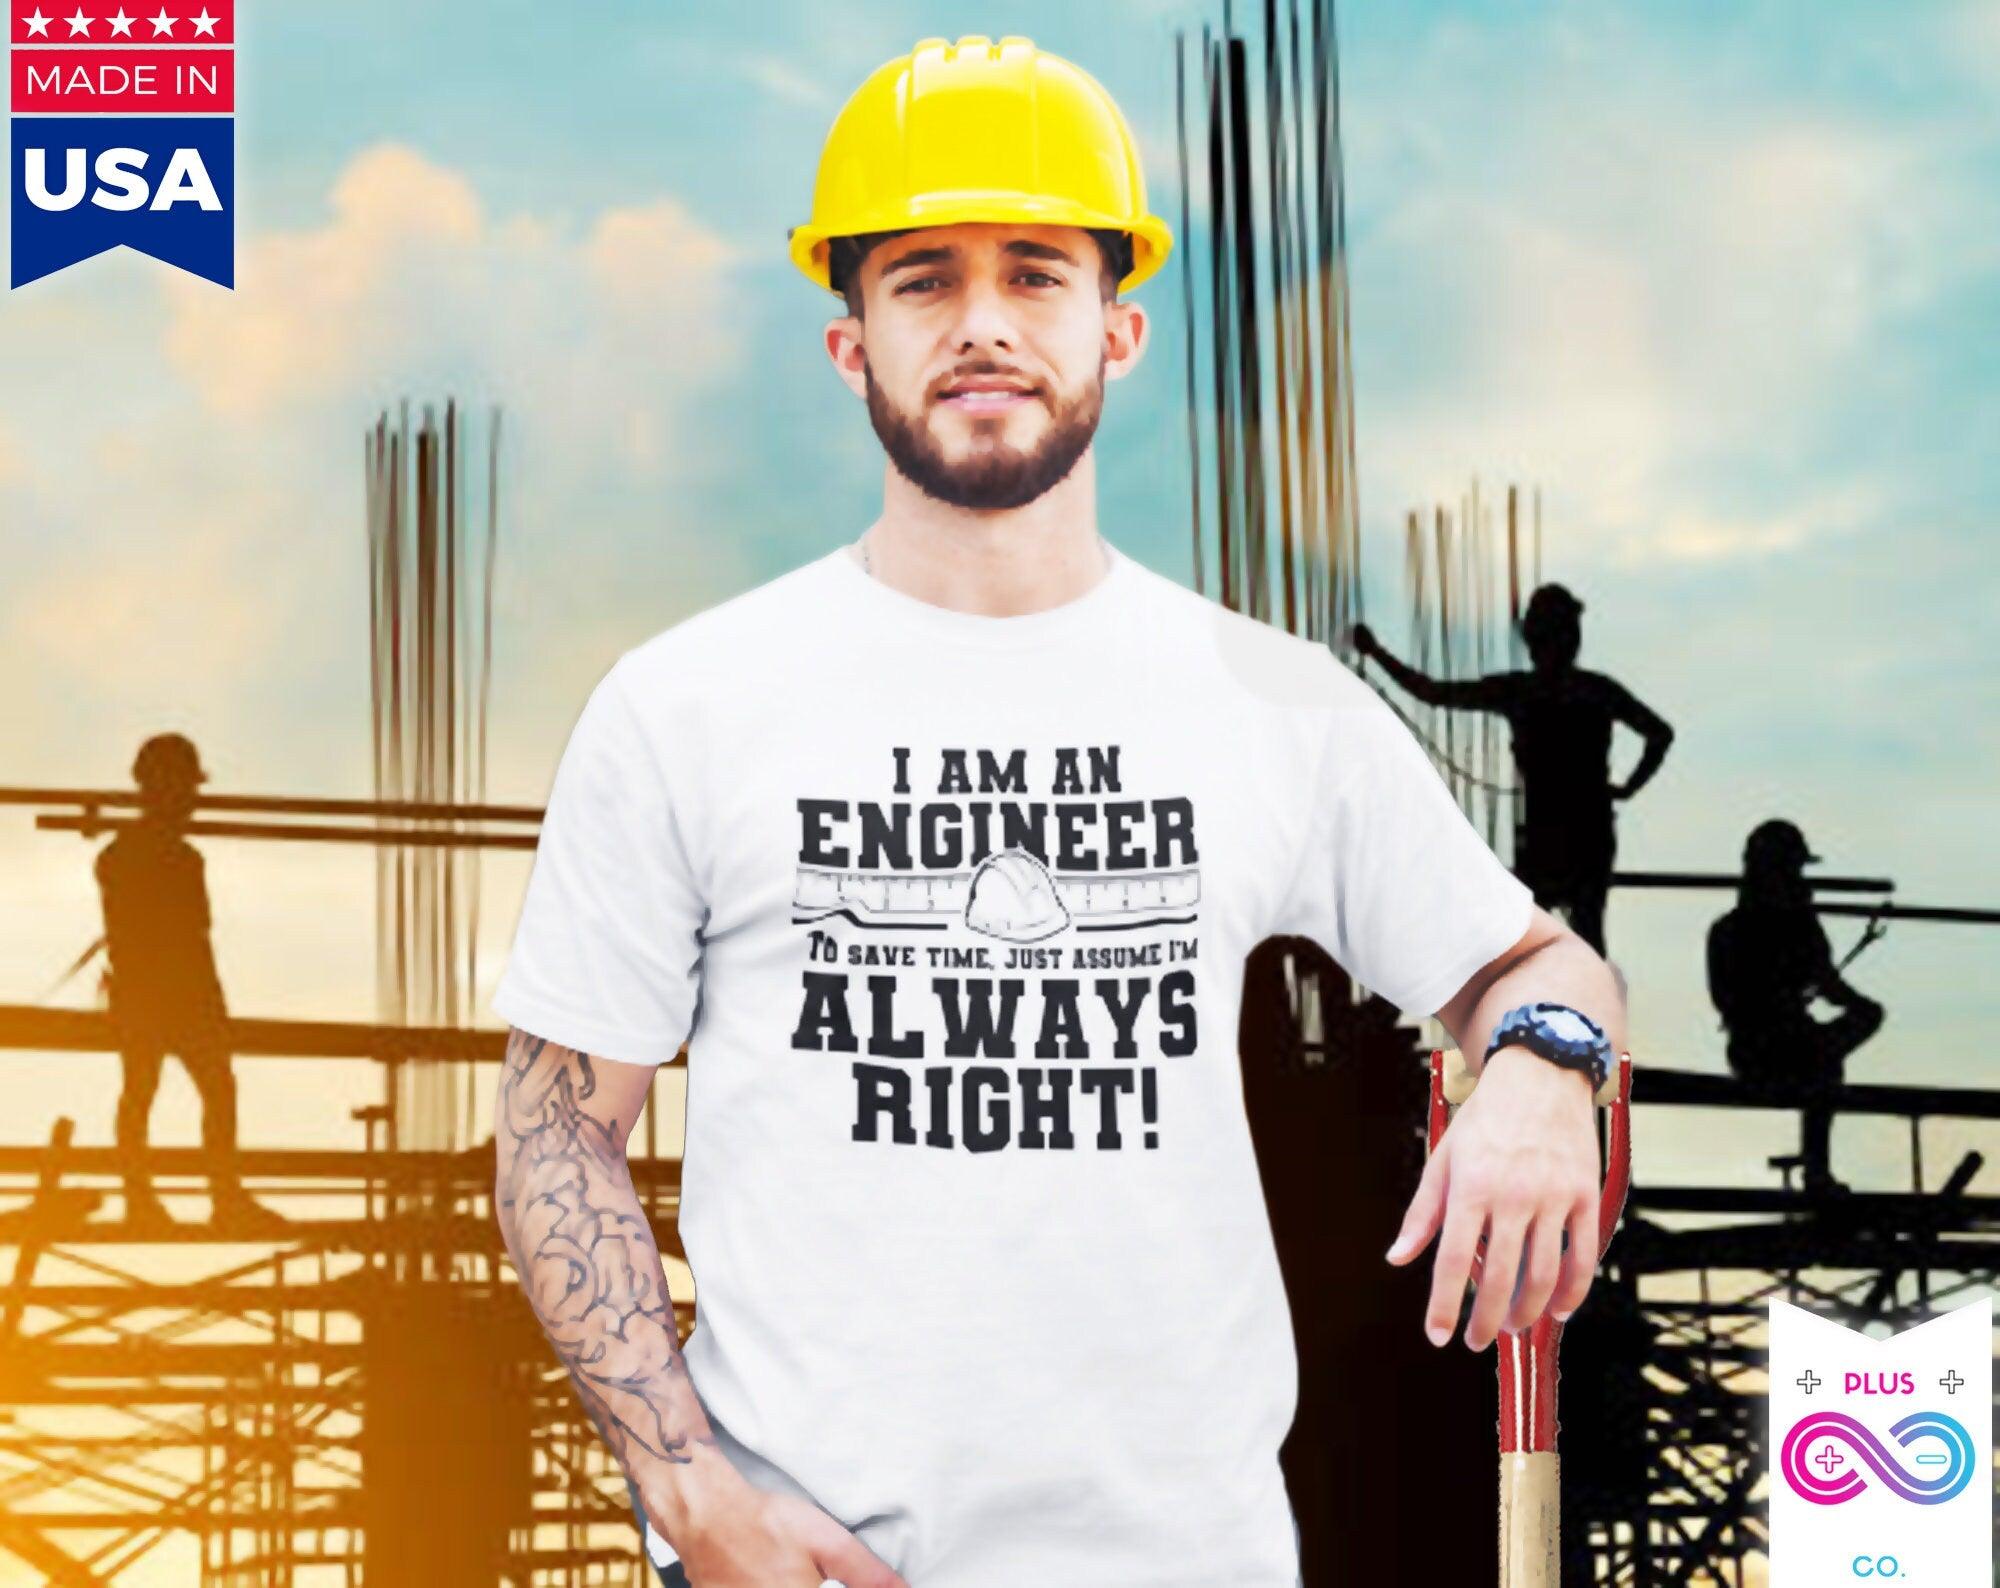 I Am An Engineer Printed Letter Summer 2022 Men's T-Shirts Short Sleeve Cotton T-Shirt, Gift for Engineers, Engineers are always right Tee, tees - plusminusco.com